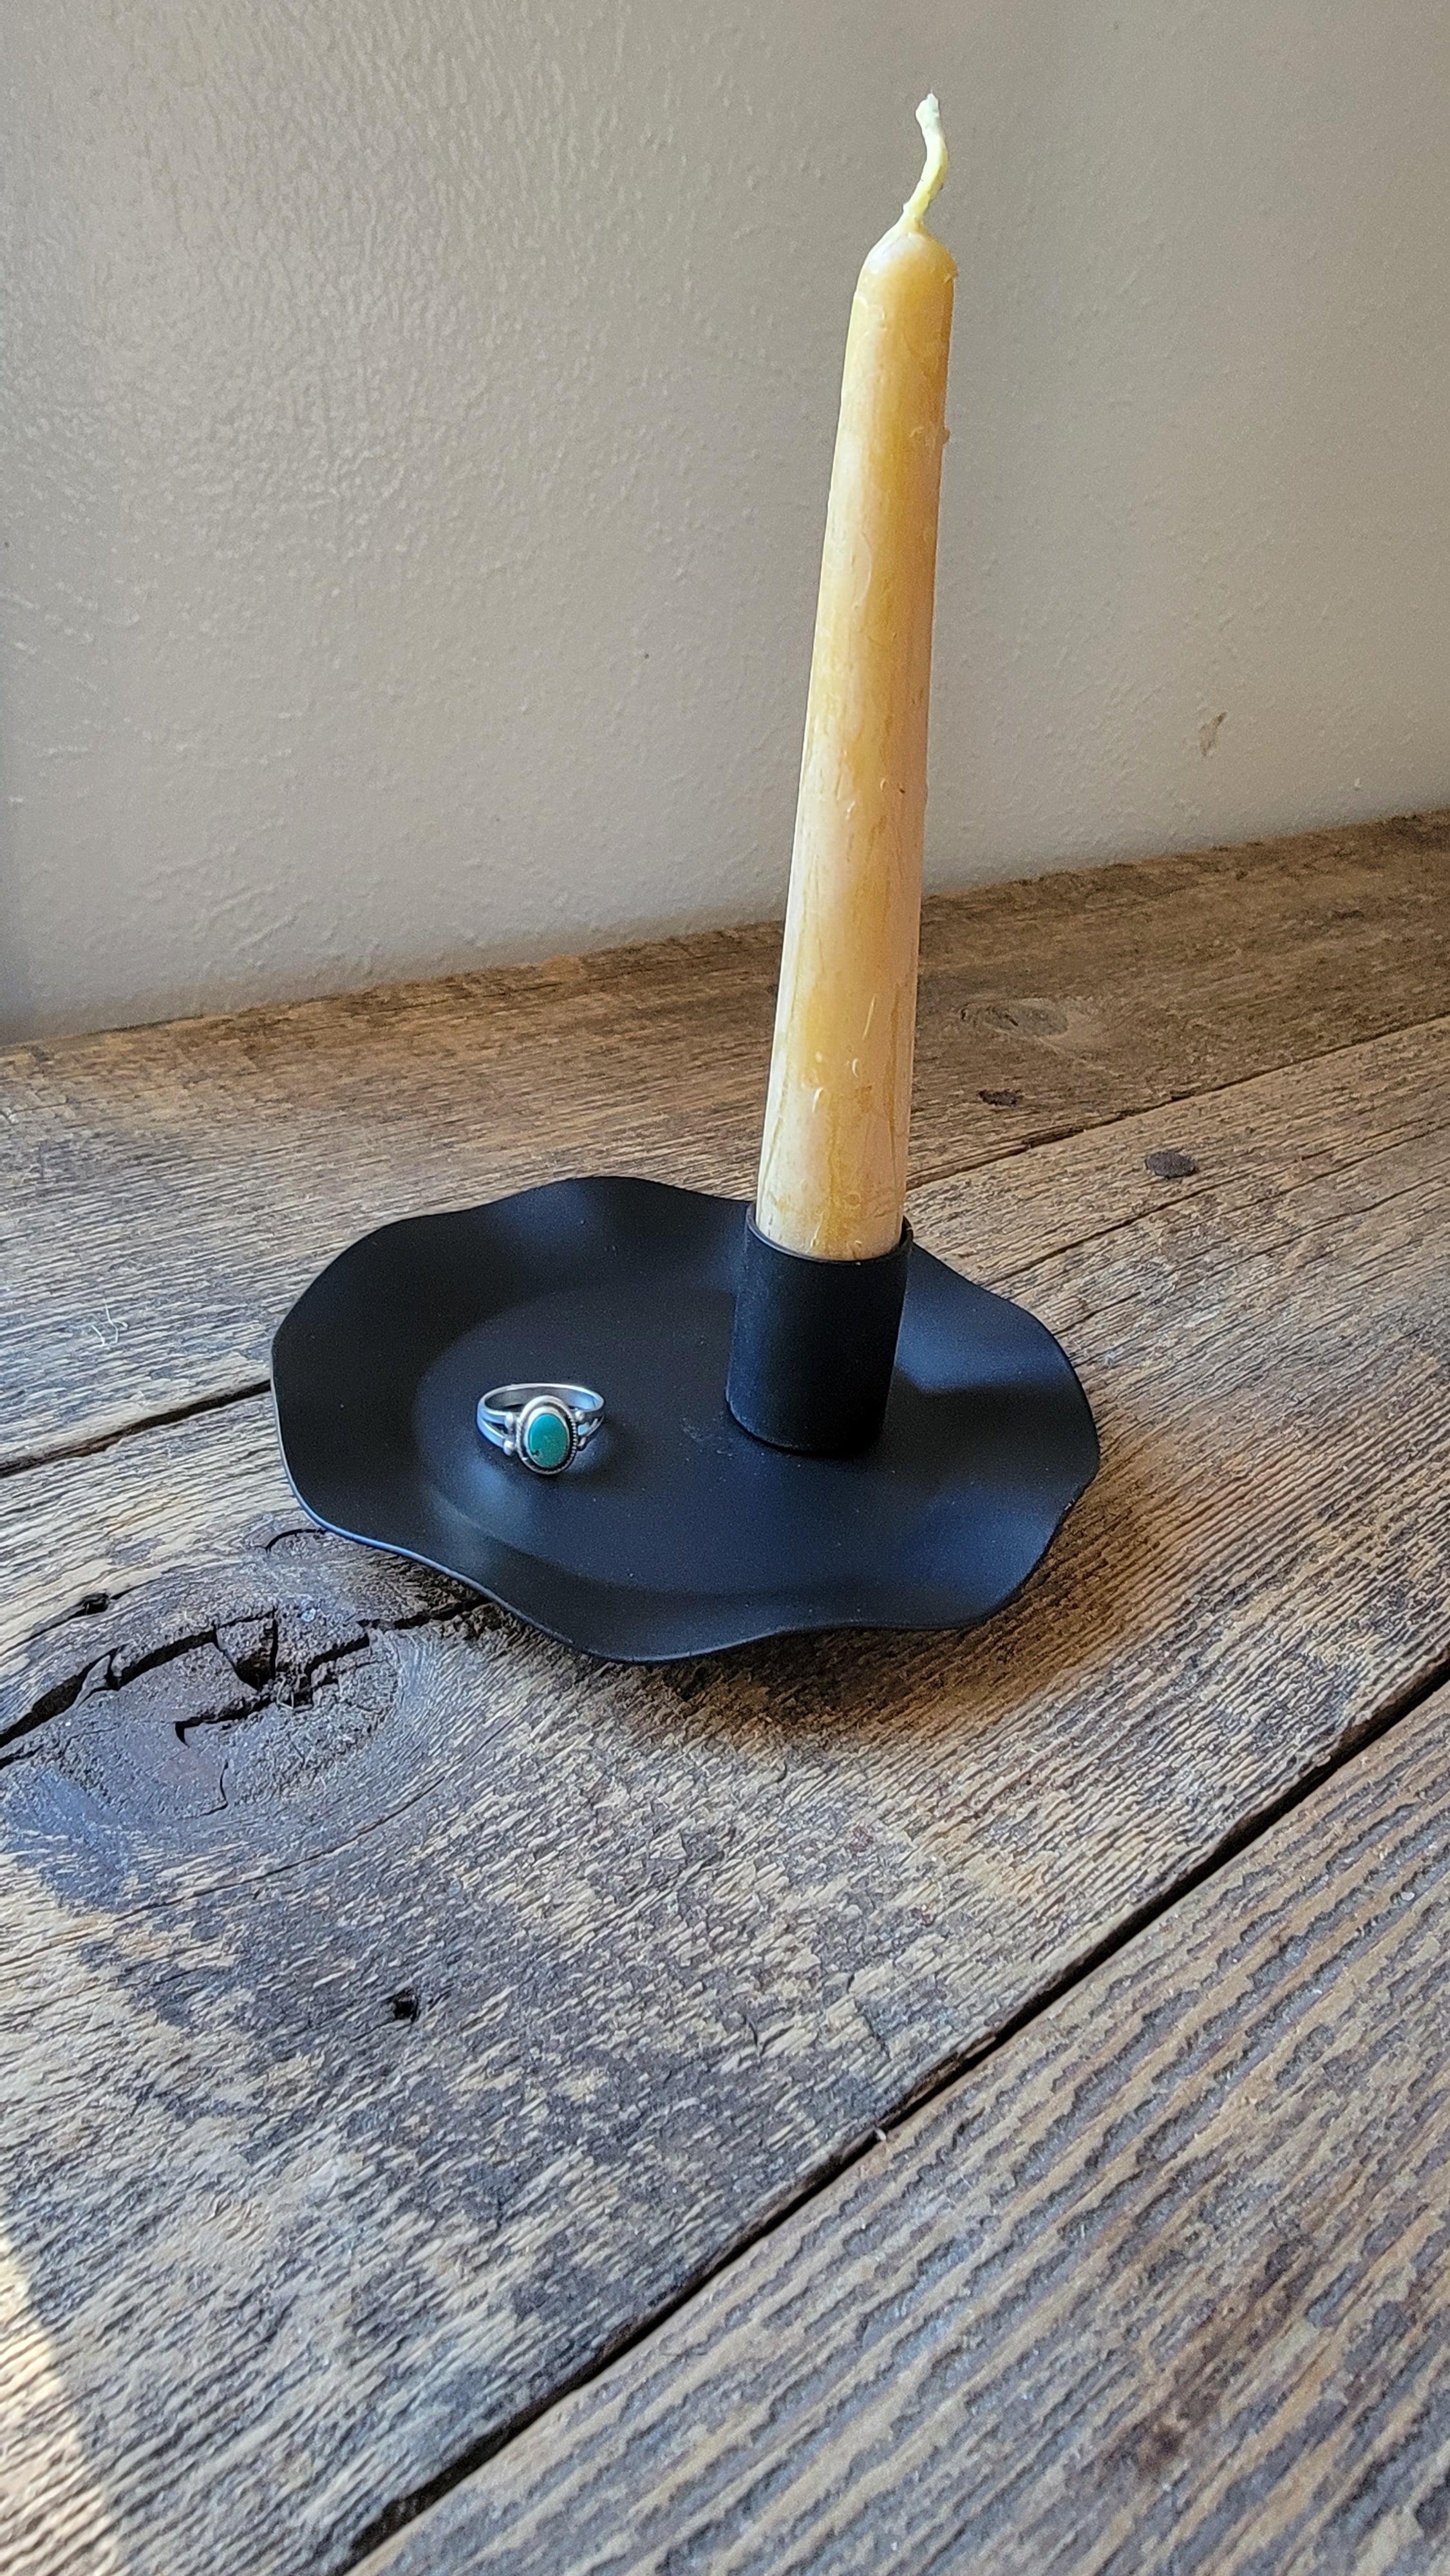 Taper and Pillar Candle plate holder- dual magnetic